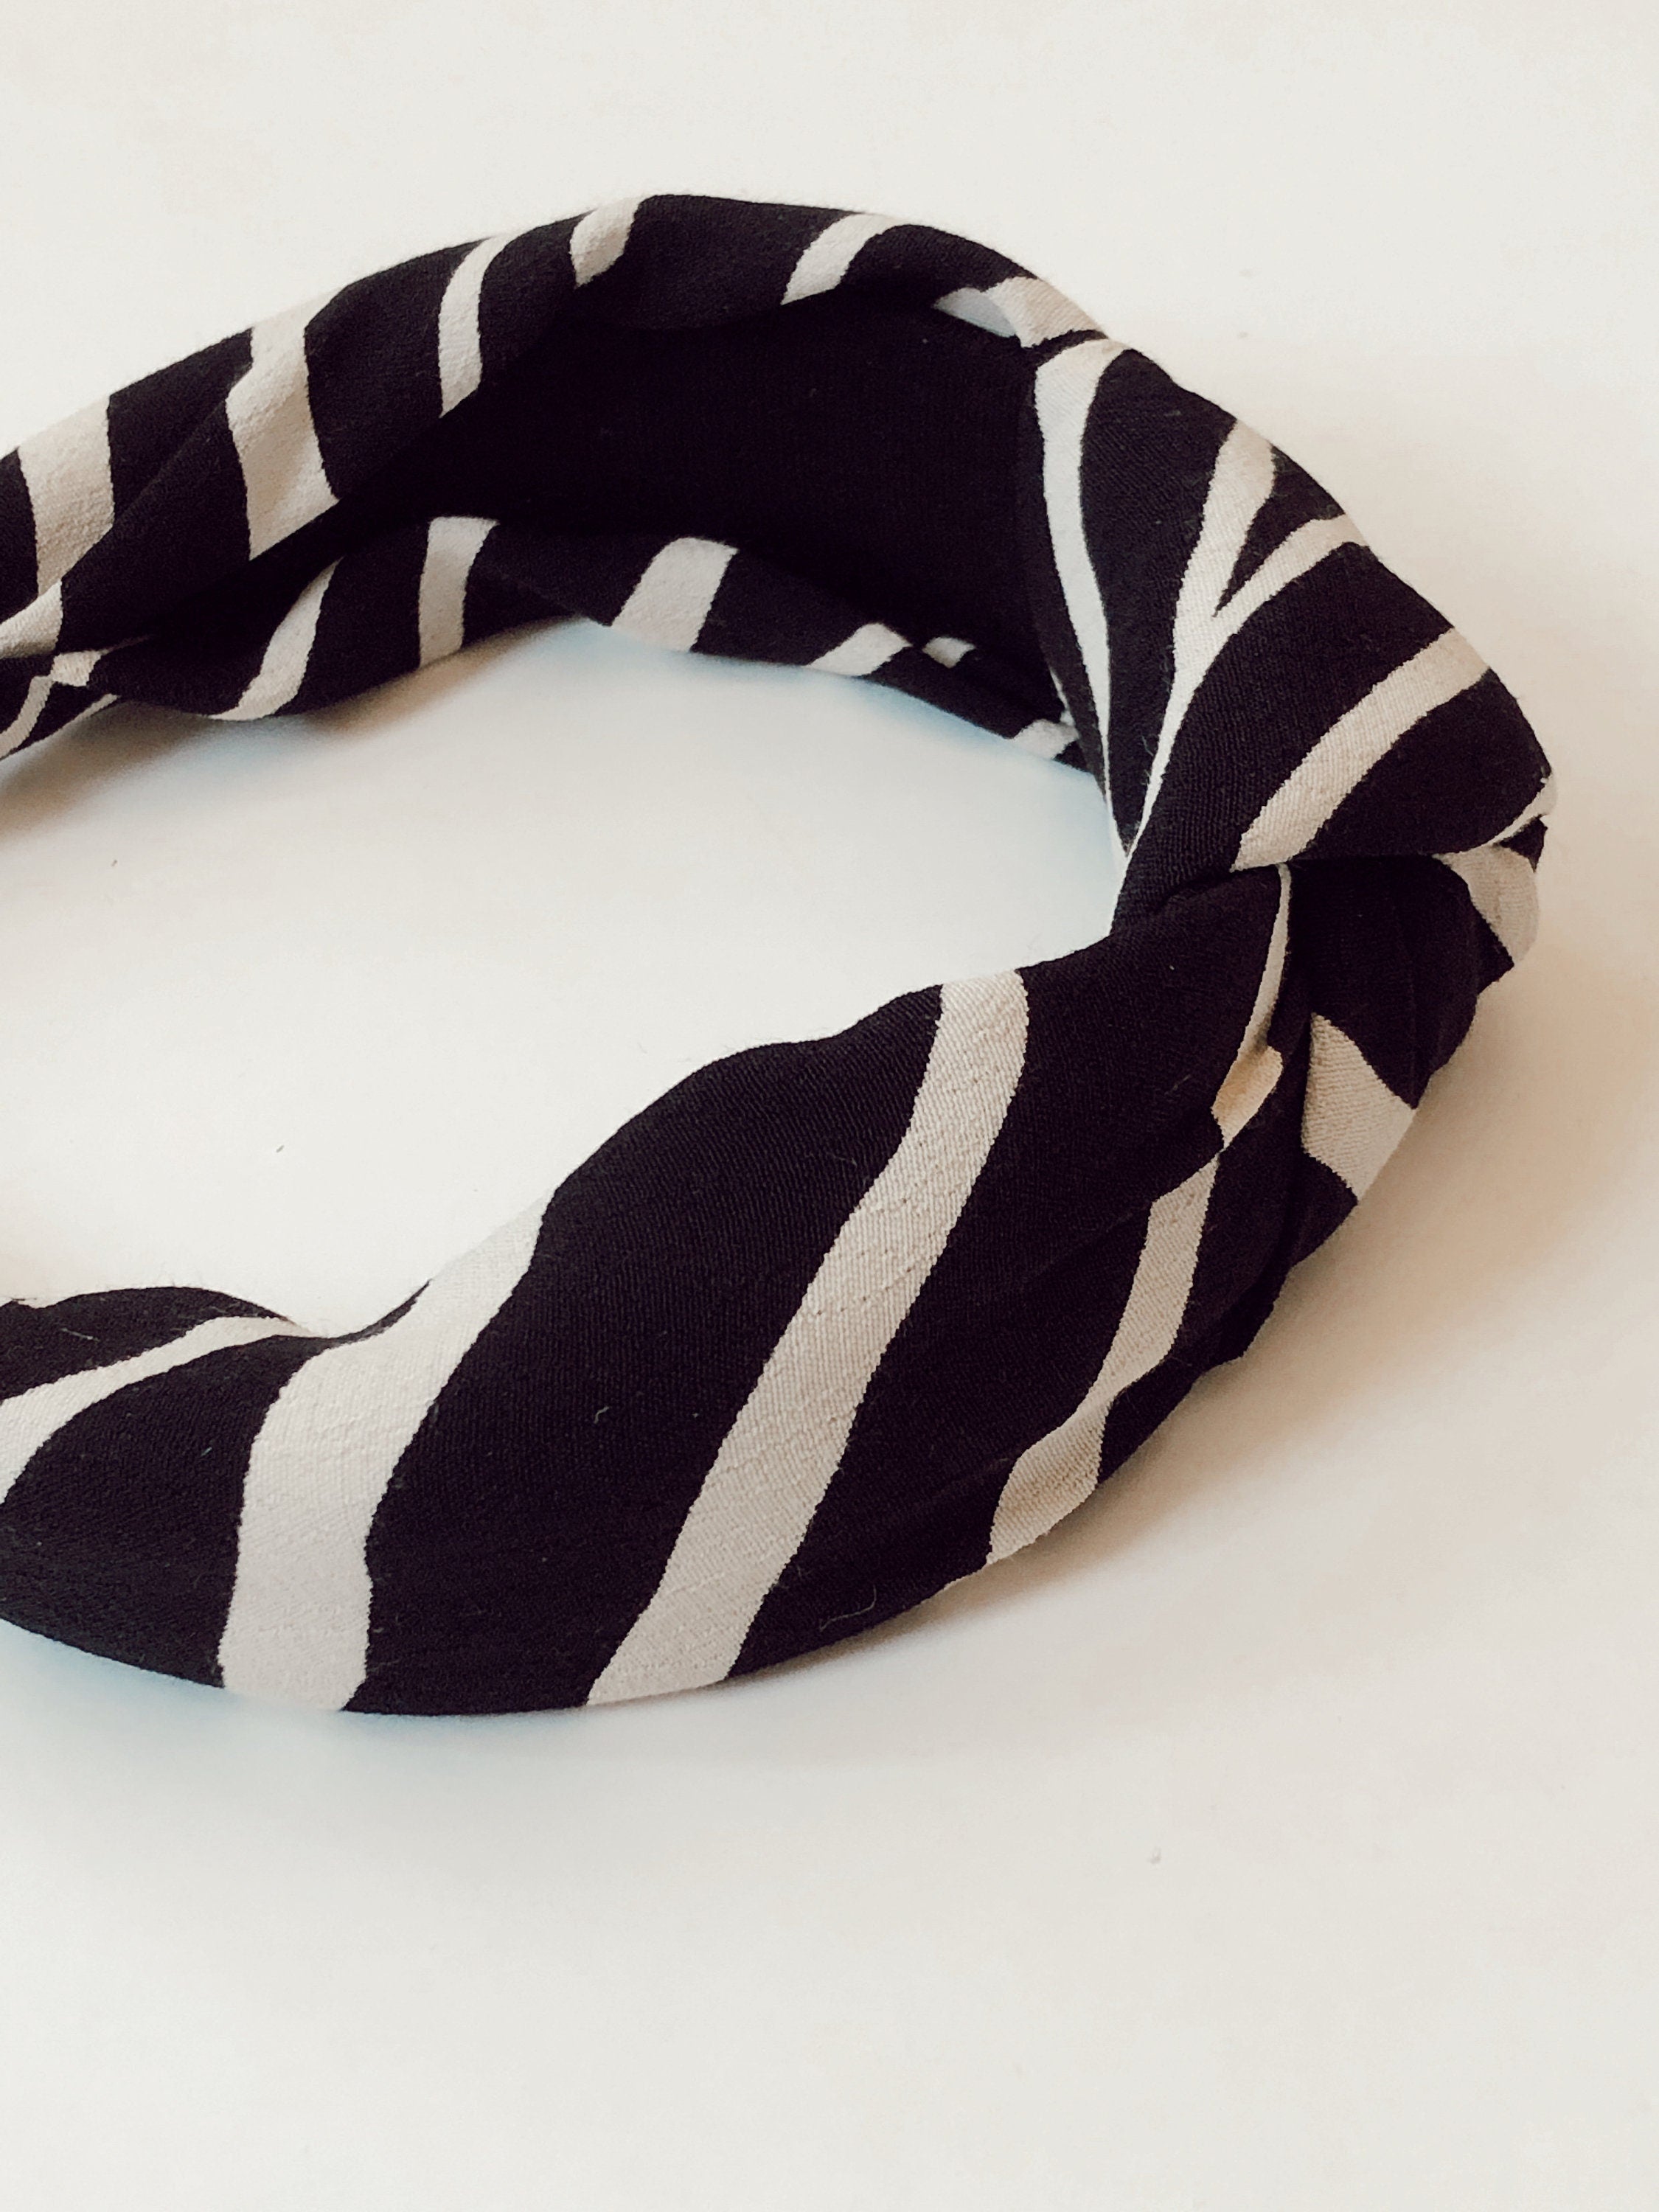 Treat her to a comfortable and stylish hair accessory with this padded knotted headband, in an eye-catching zebra pattern.